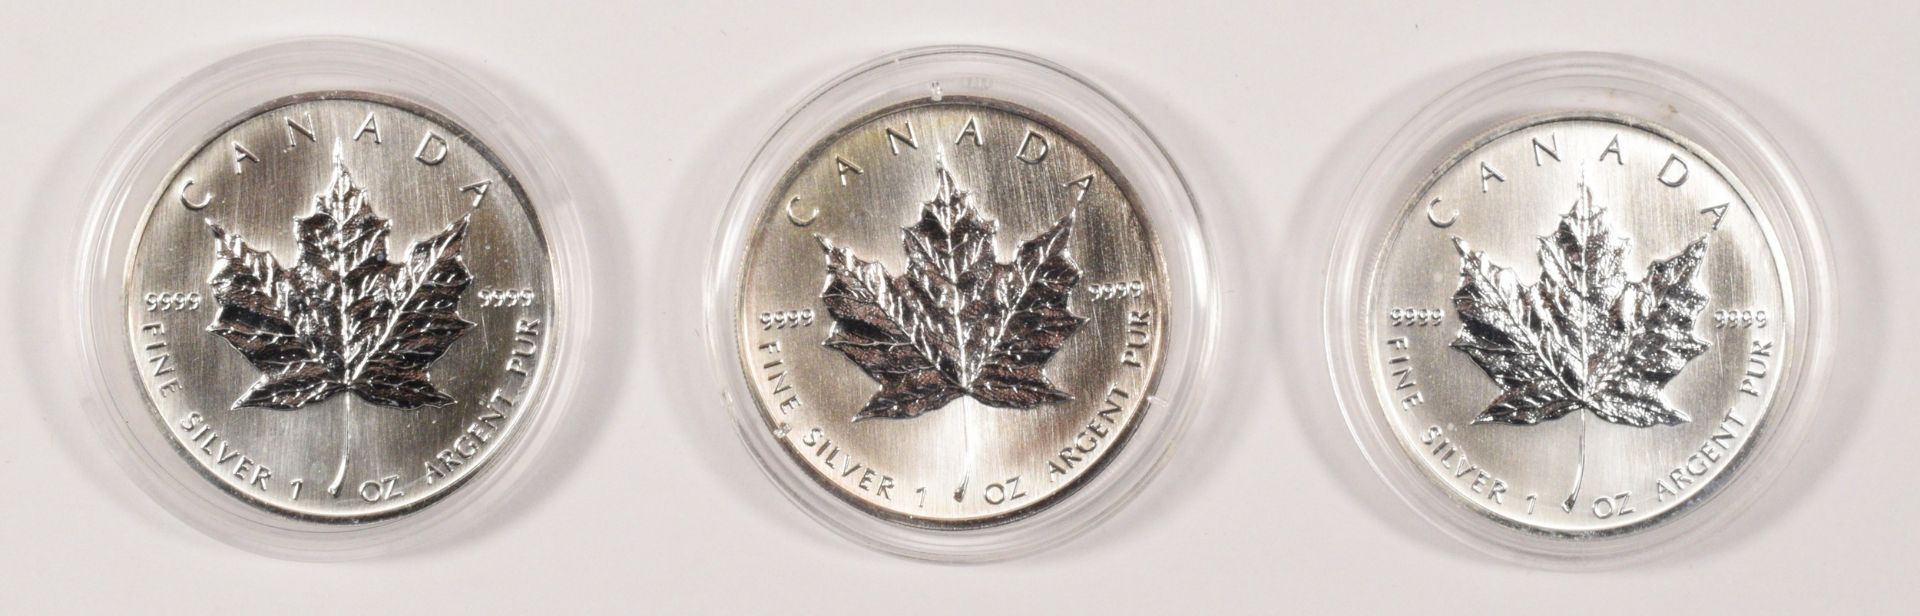 Three silver proof Canadian 5 dollars, 2004, cased. To be sold on behalf of Monkey World, Dorset. - Image 2 of 2